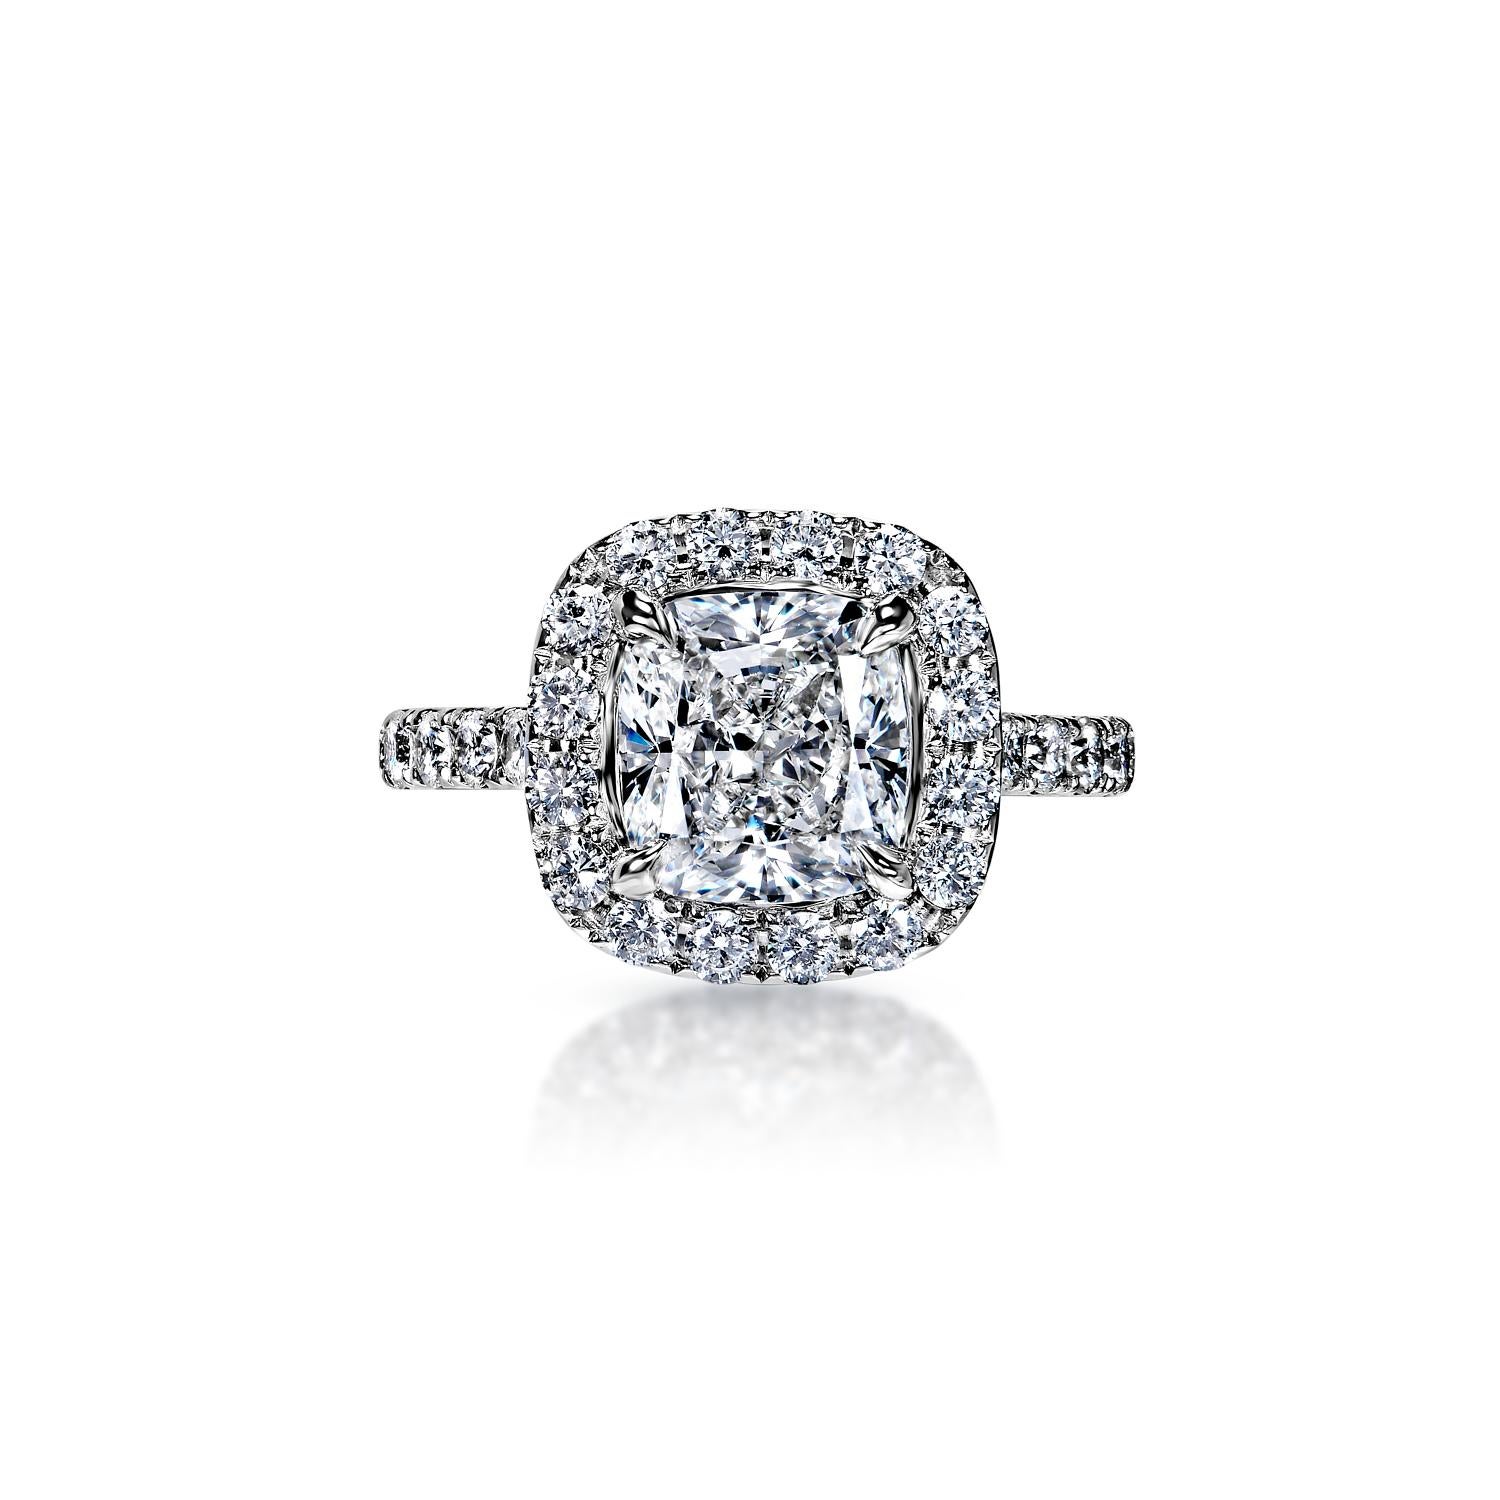 Shelby 3 Carat G VS2 Cushion Cut Diamond Engagement Ring in 18k White Gold. GIA Certified. By Mike Nekta 

 

GIA CERTIFIED
Center Diamond:

Carat Weight: 2.53 Carats
Color : G
Clarity: VS2
Style: Cushion Cut

Ring:
Setting: Halo, Sidestone, French